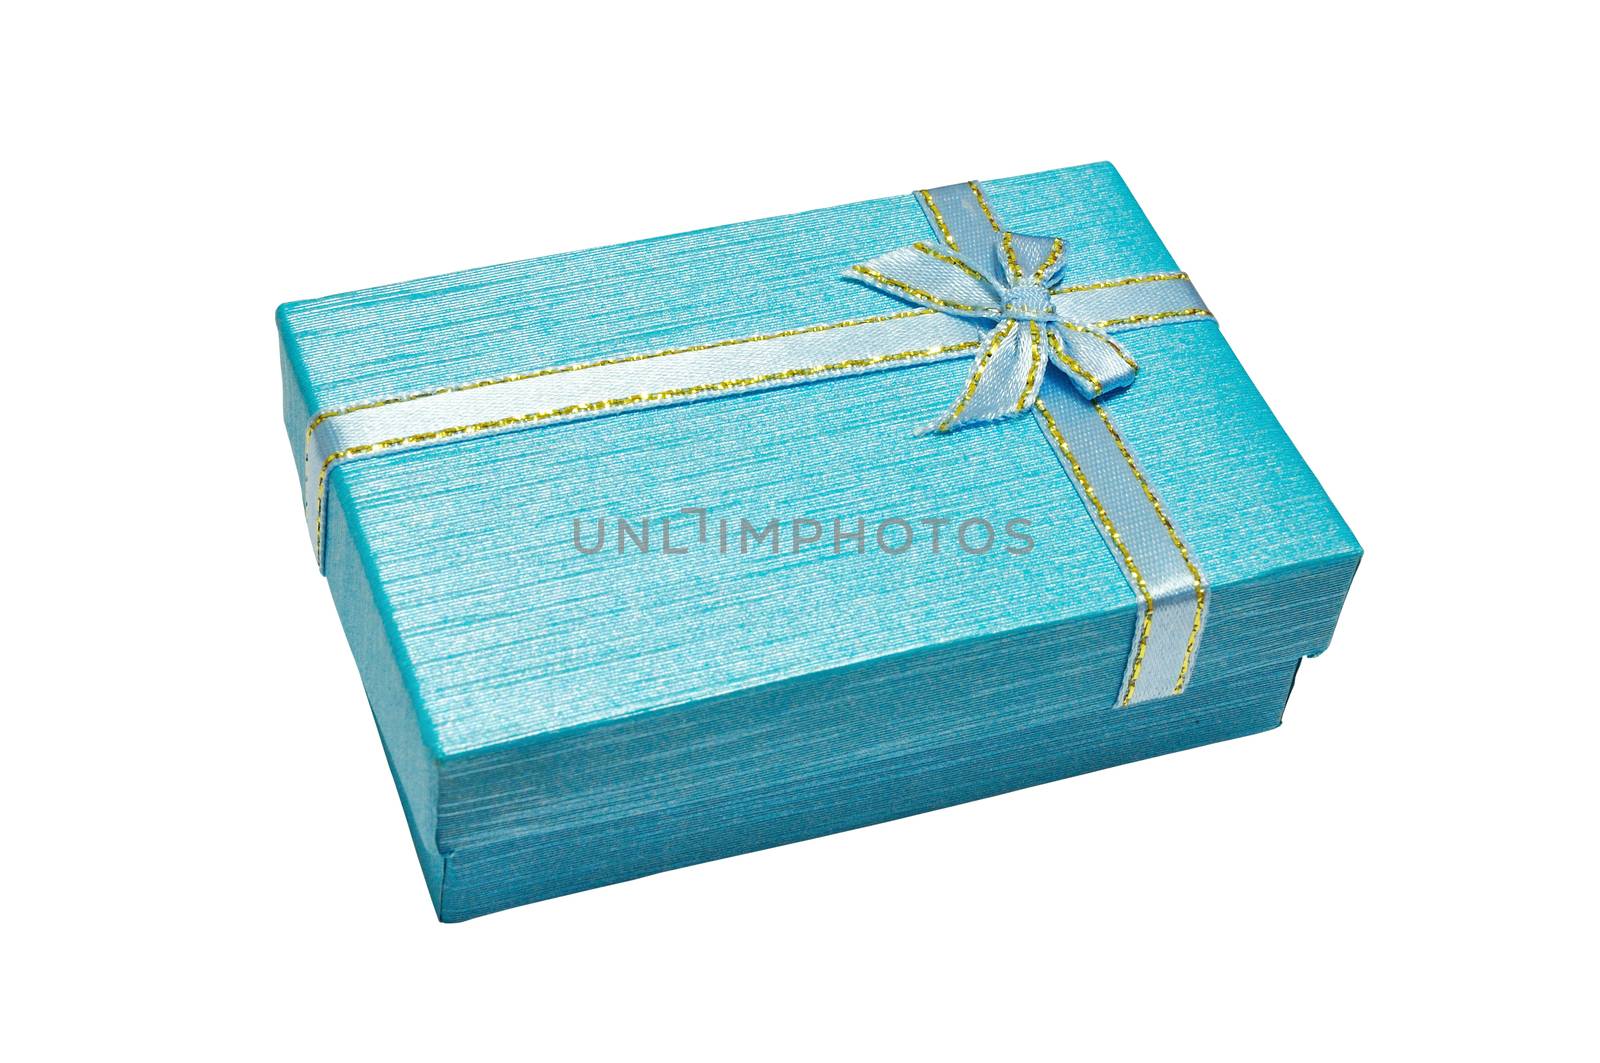 Gift box with ribbon and bow isolated on white Background with Clipping path